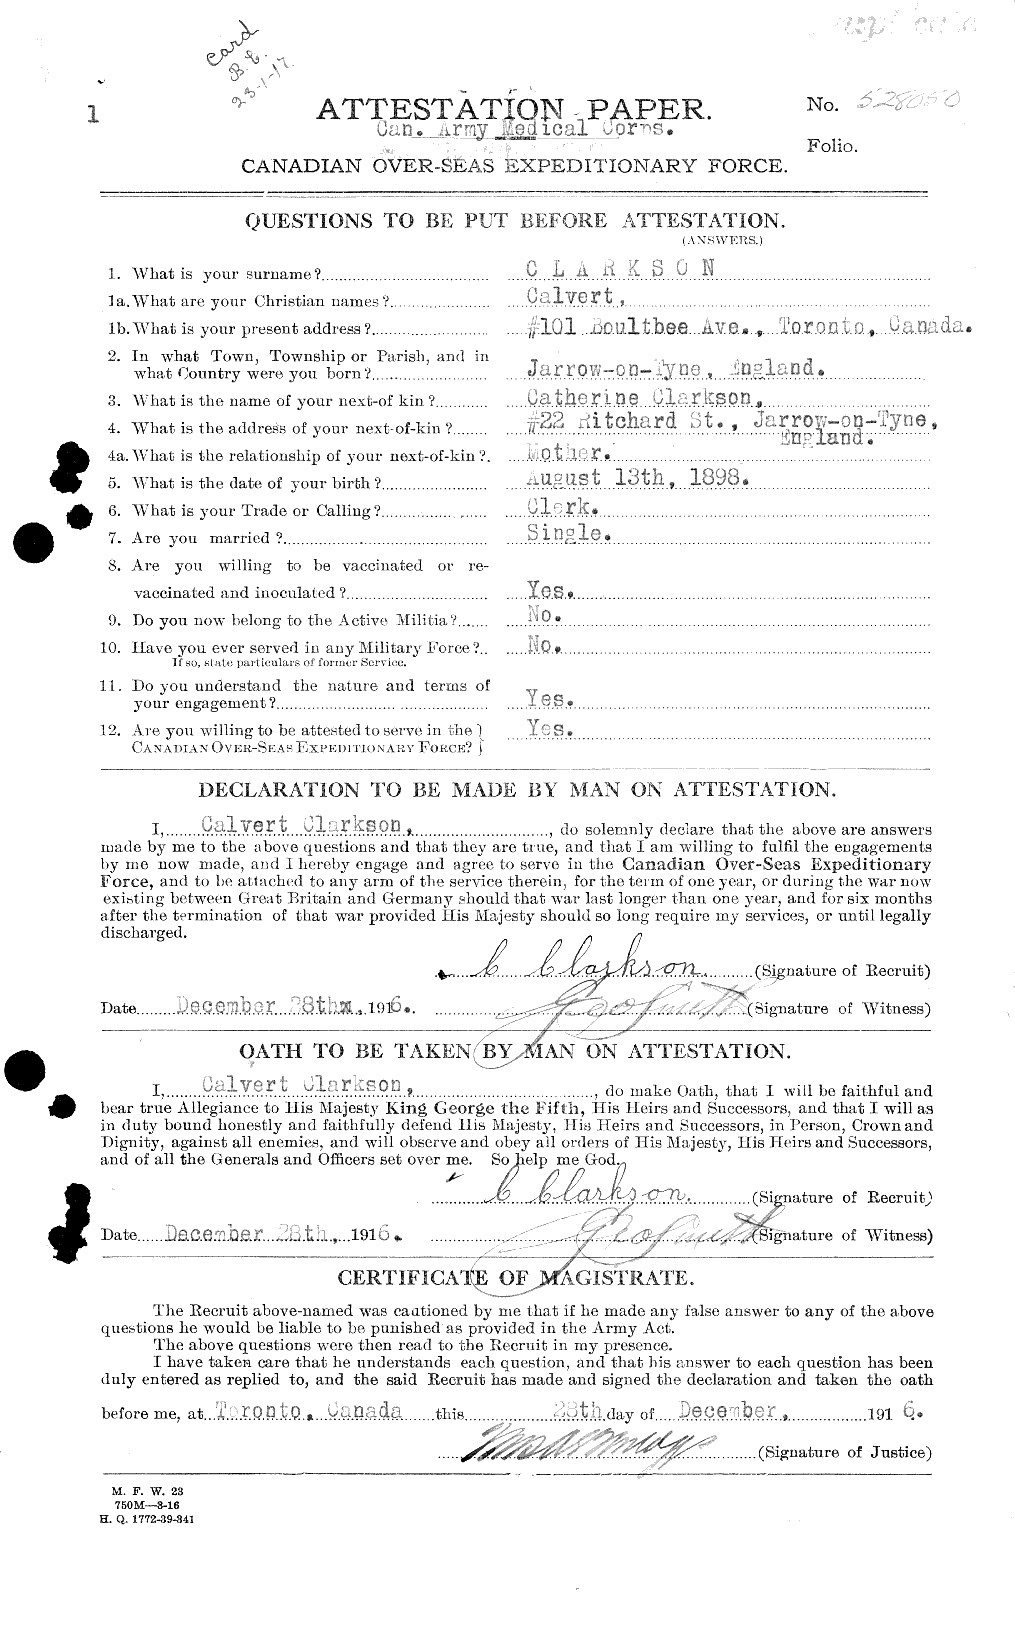 Personnel Records of the First World War - CEF 023621a